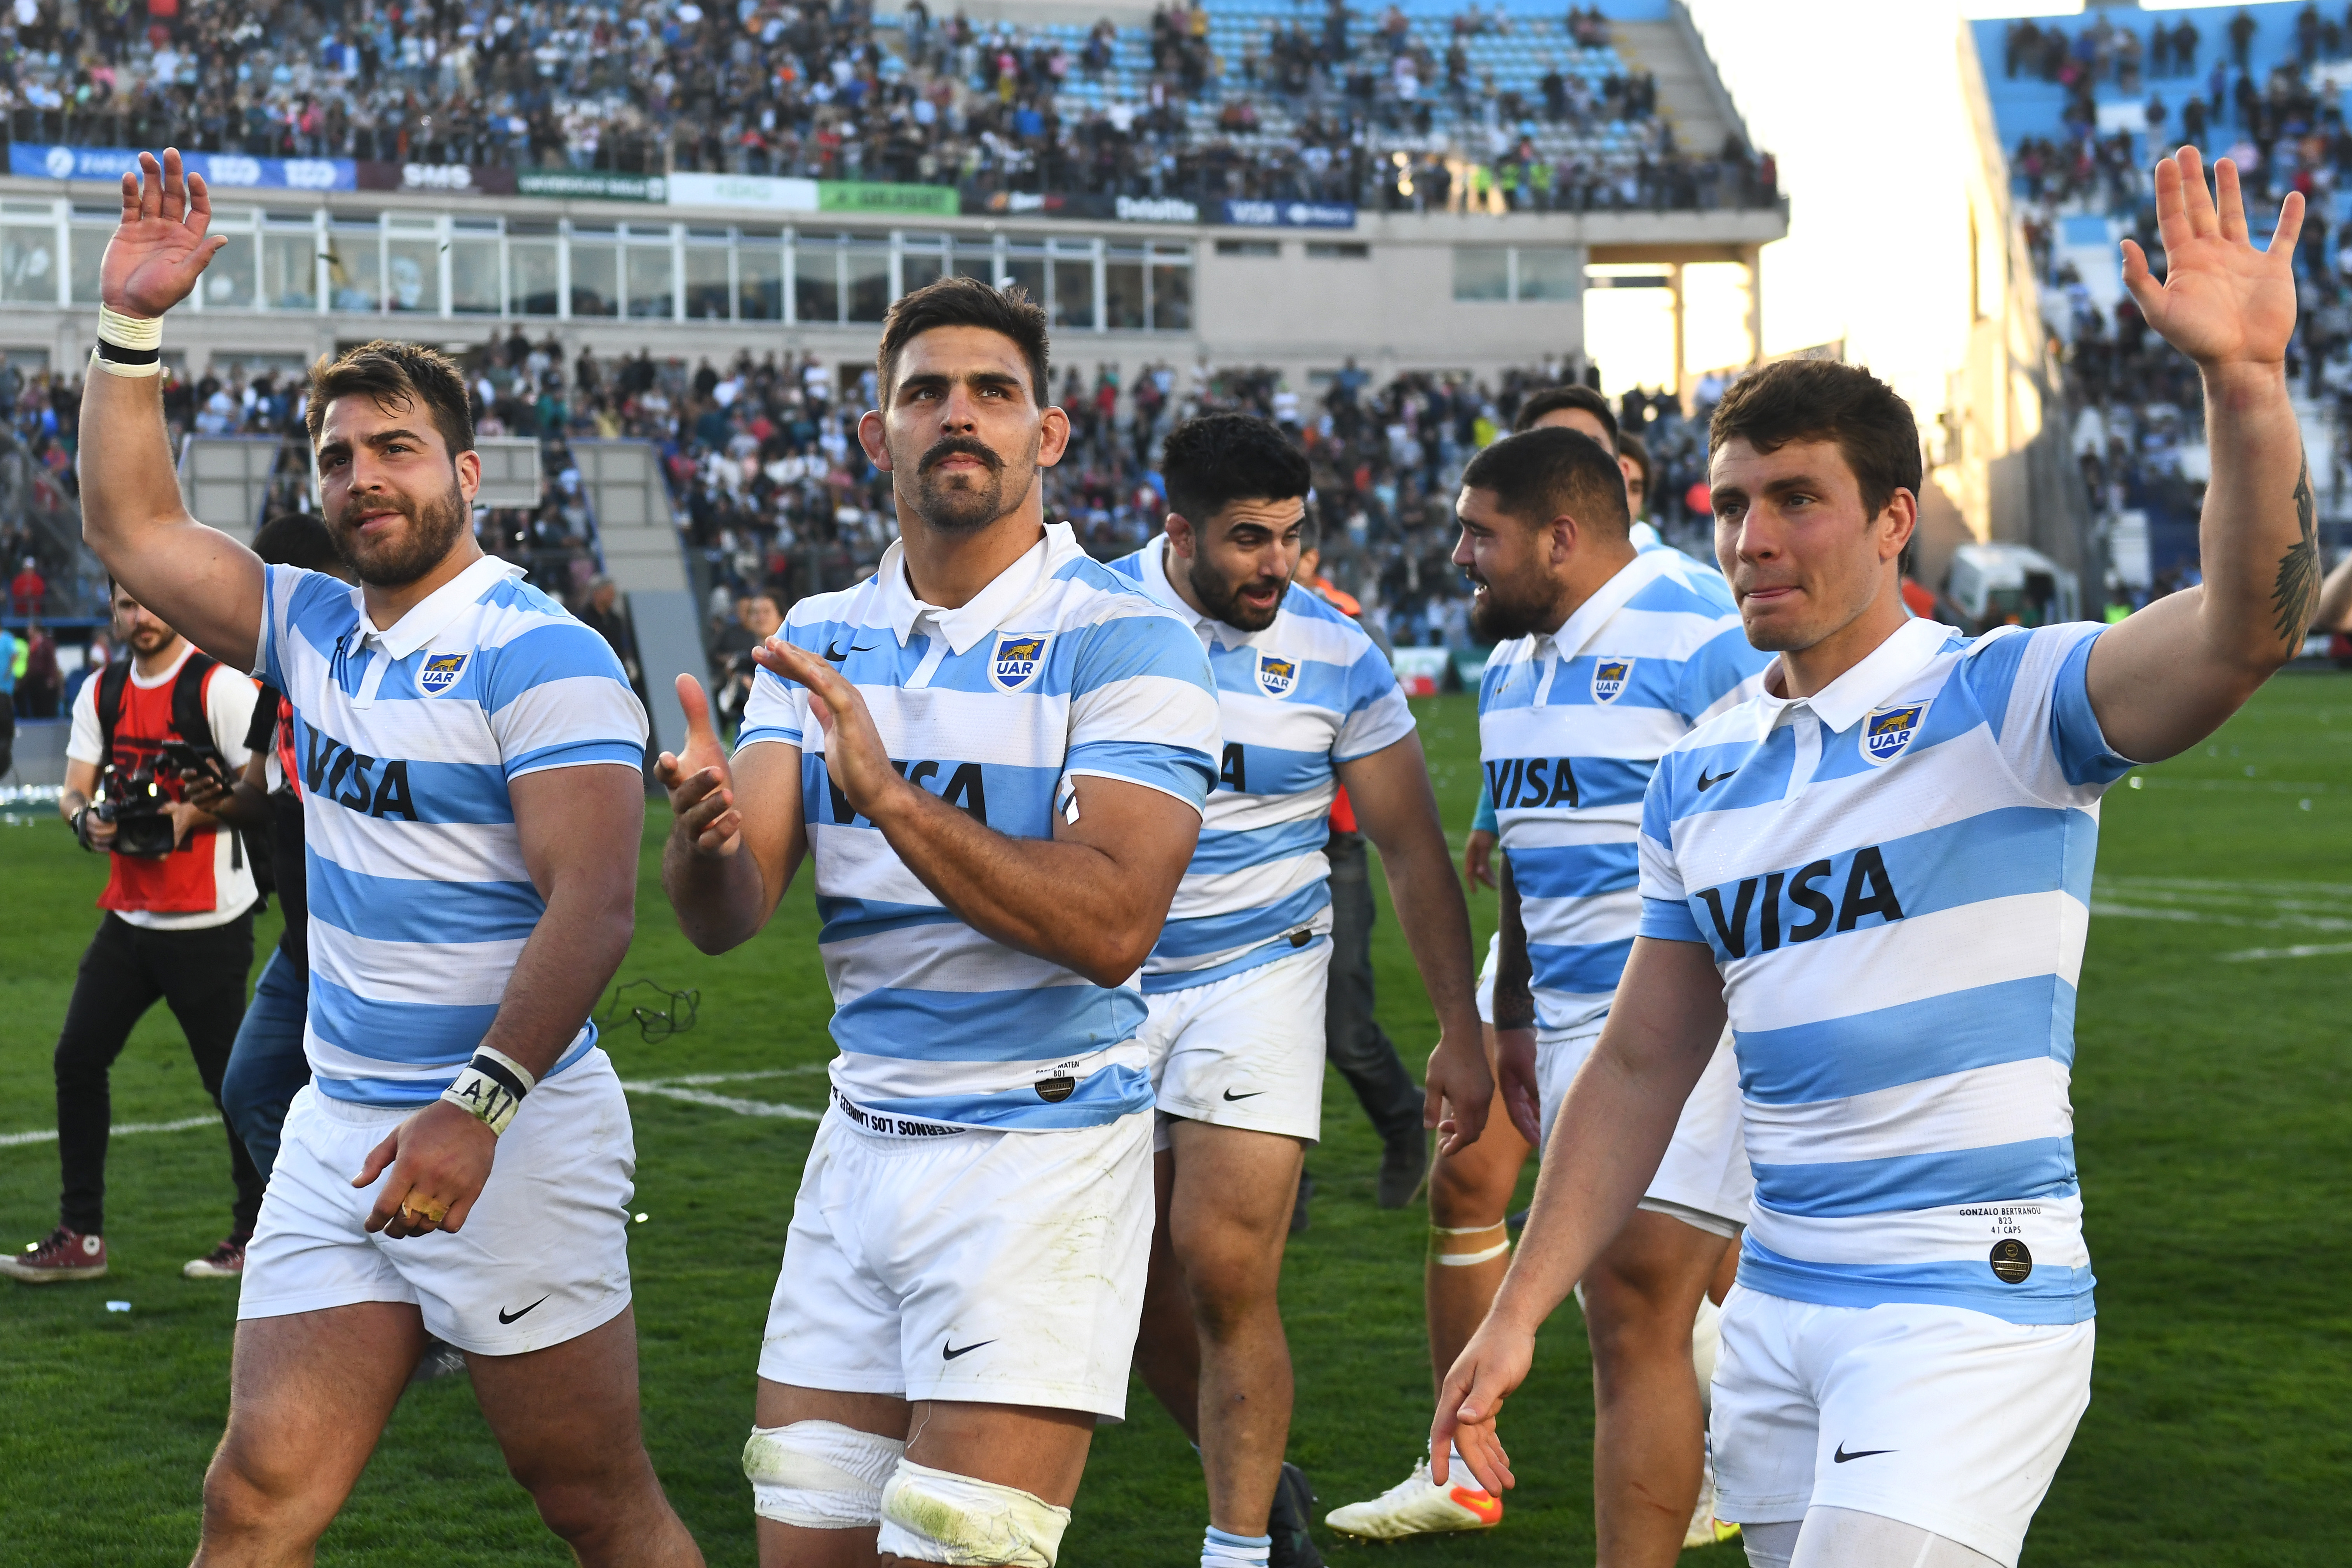 Captain Pablo Matera of Argentina  and teammates celebrate after winning a Rugby Championship match between Argentina and Australian at San Juan del Bicentenario Stadium